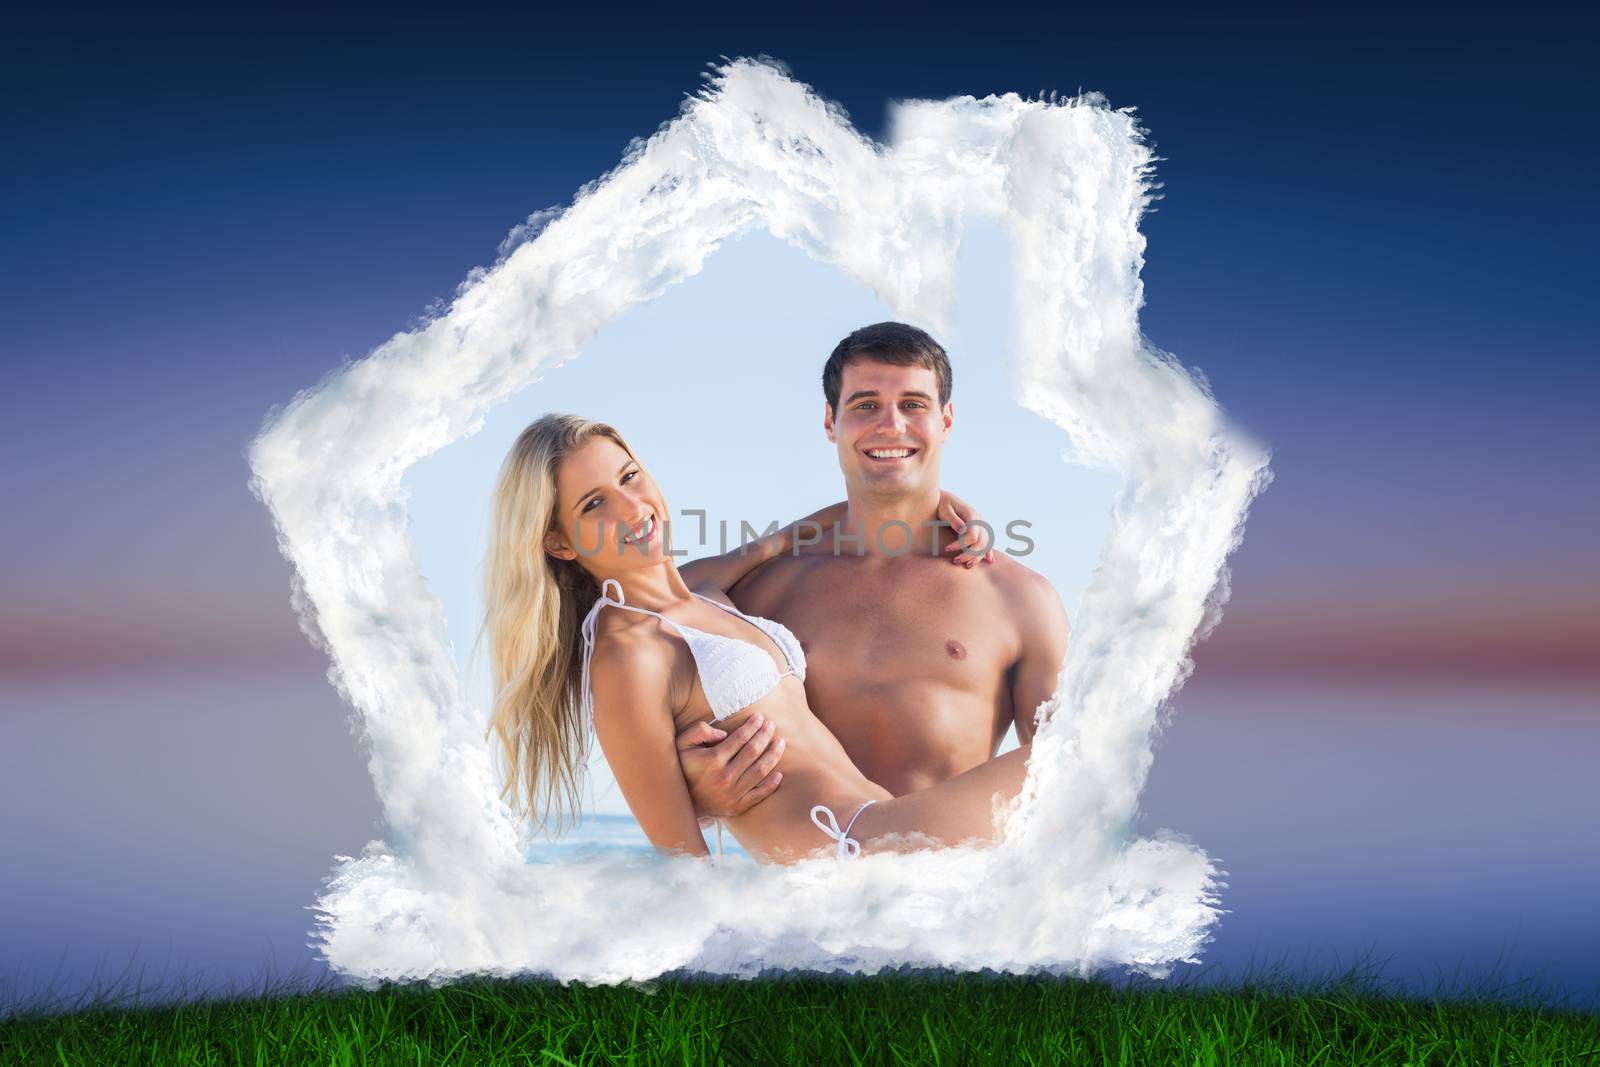 Man carrying his pretty girlfriend smiling at camera against green grass under blue and purple sky